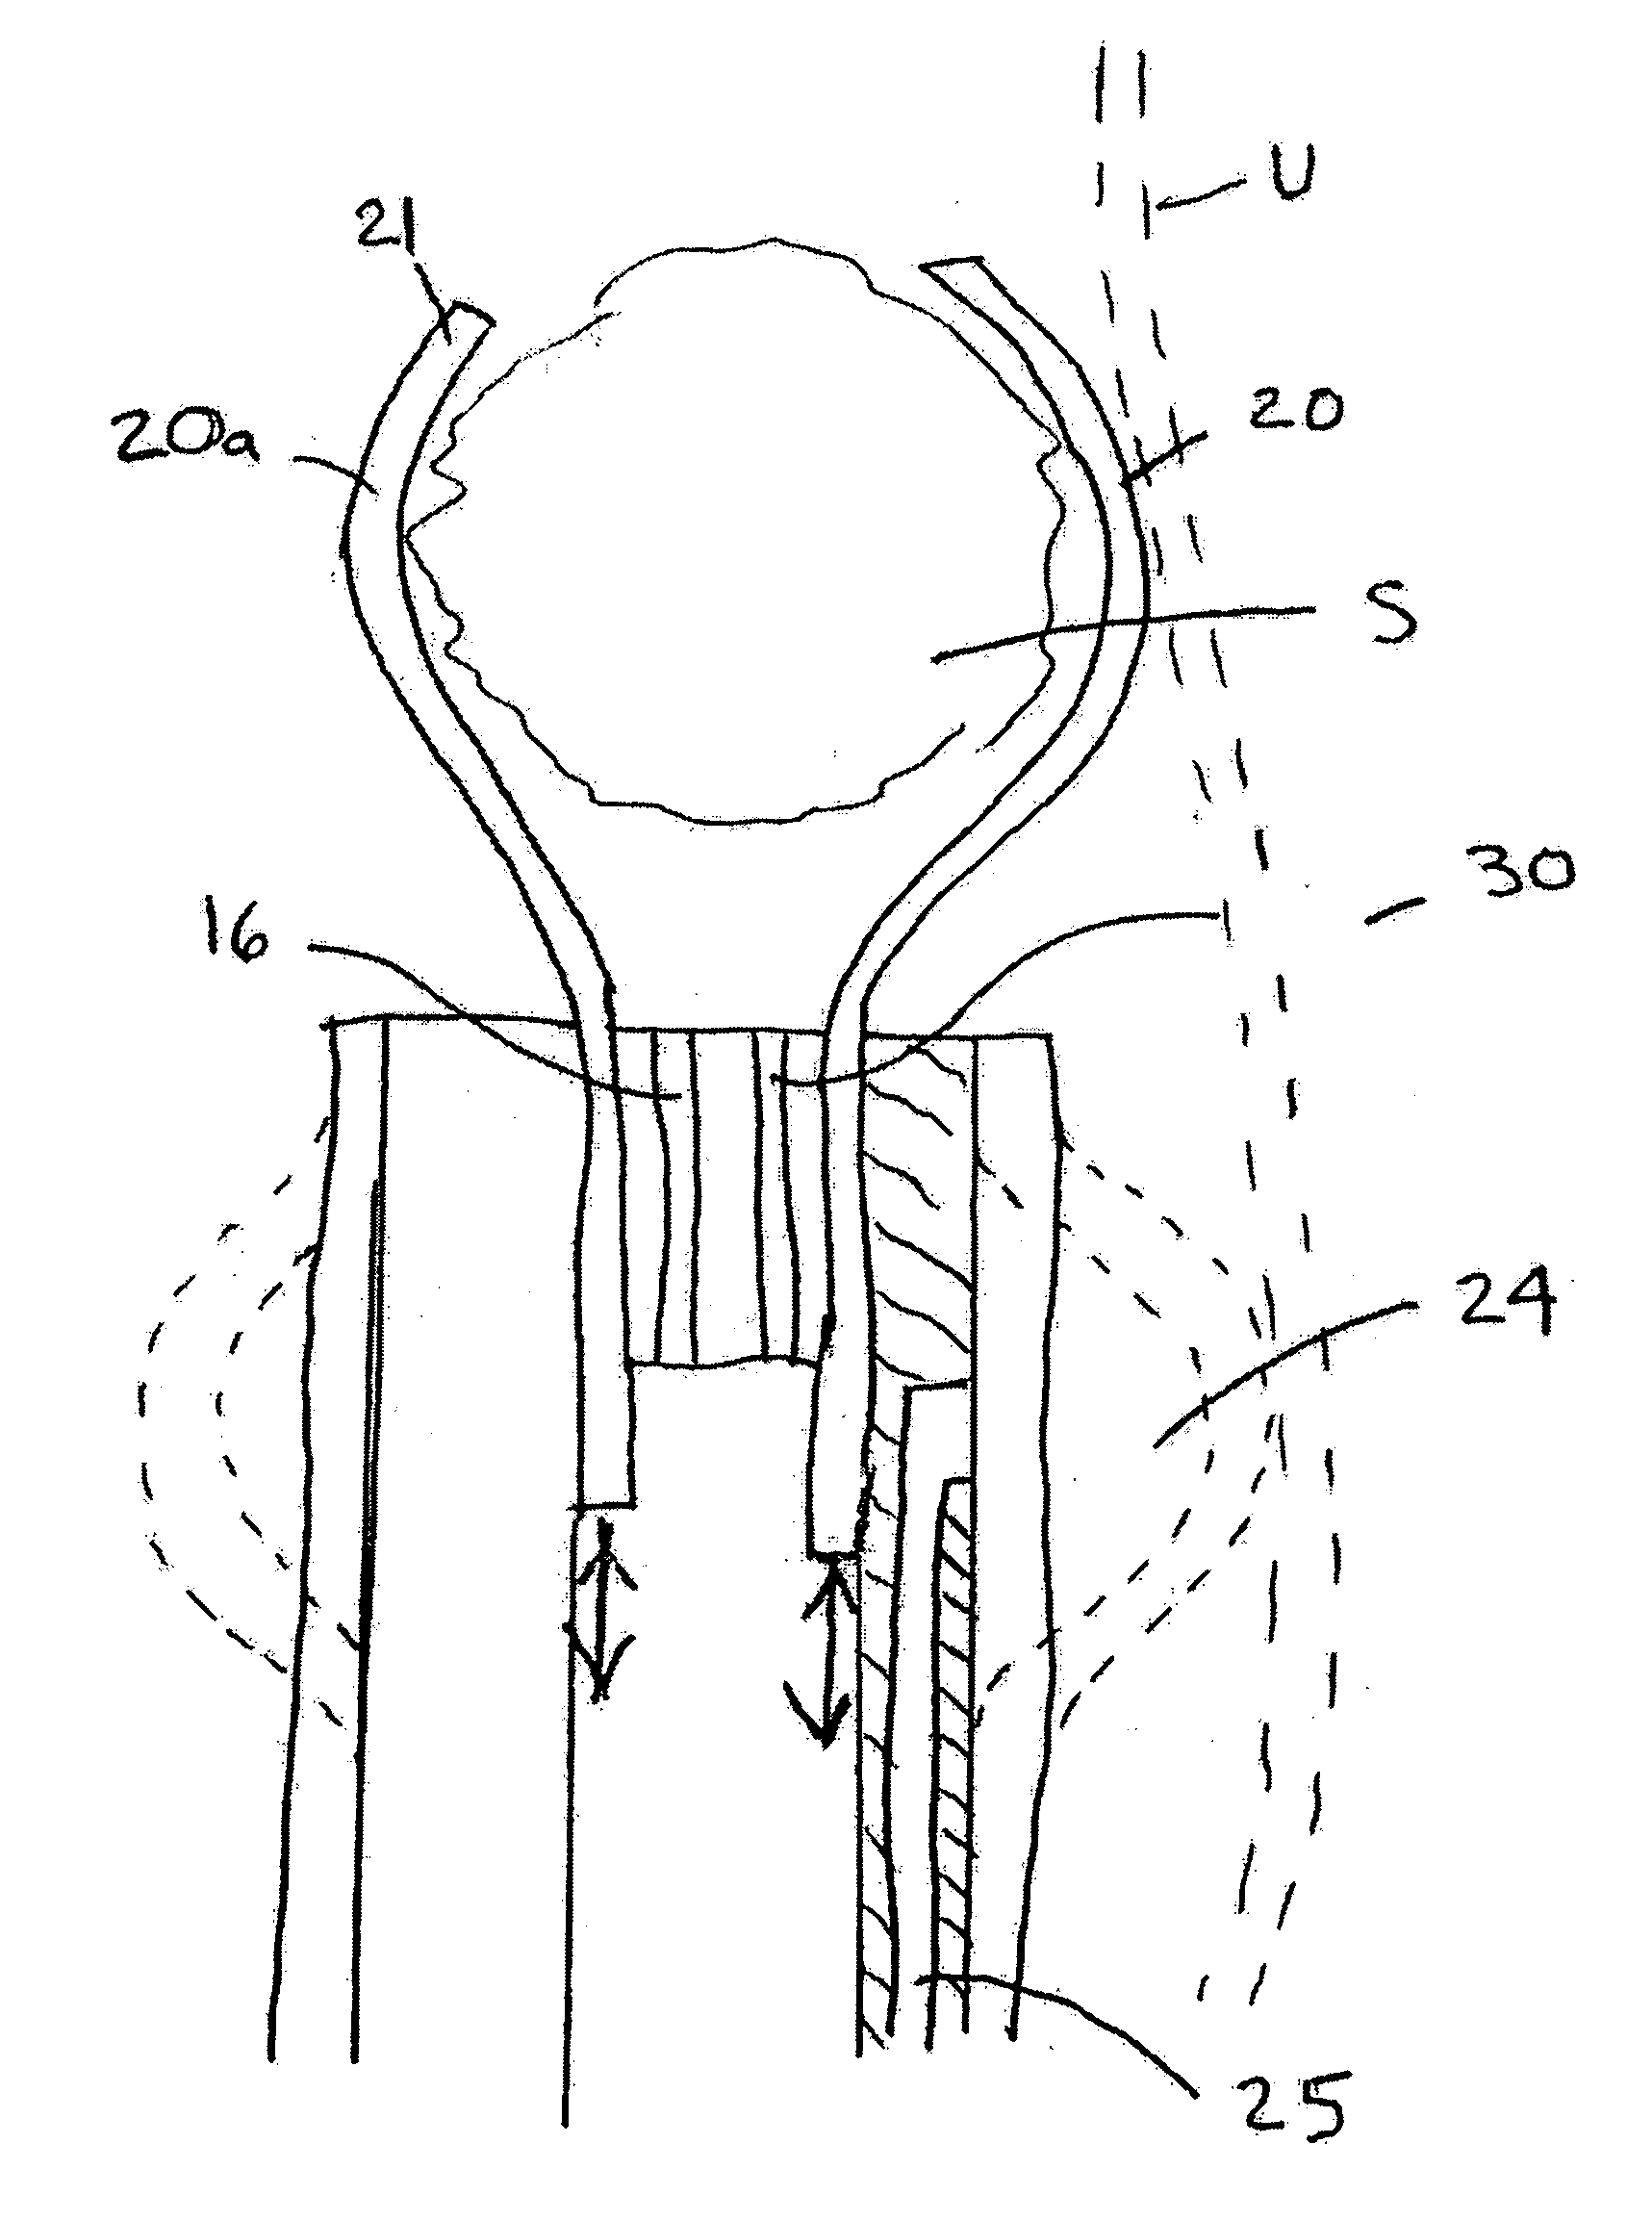 Apparatus and method for stone capture and removal